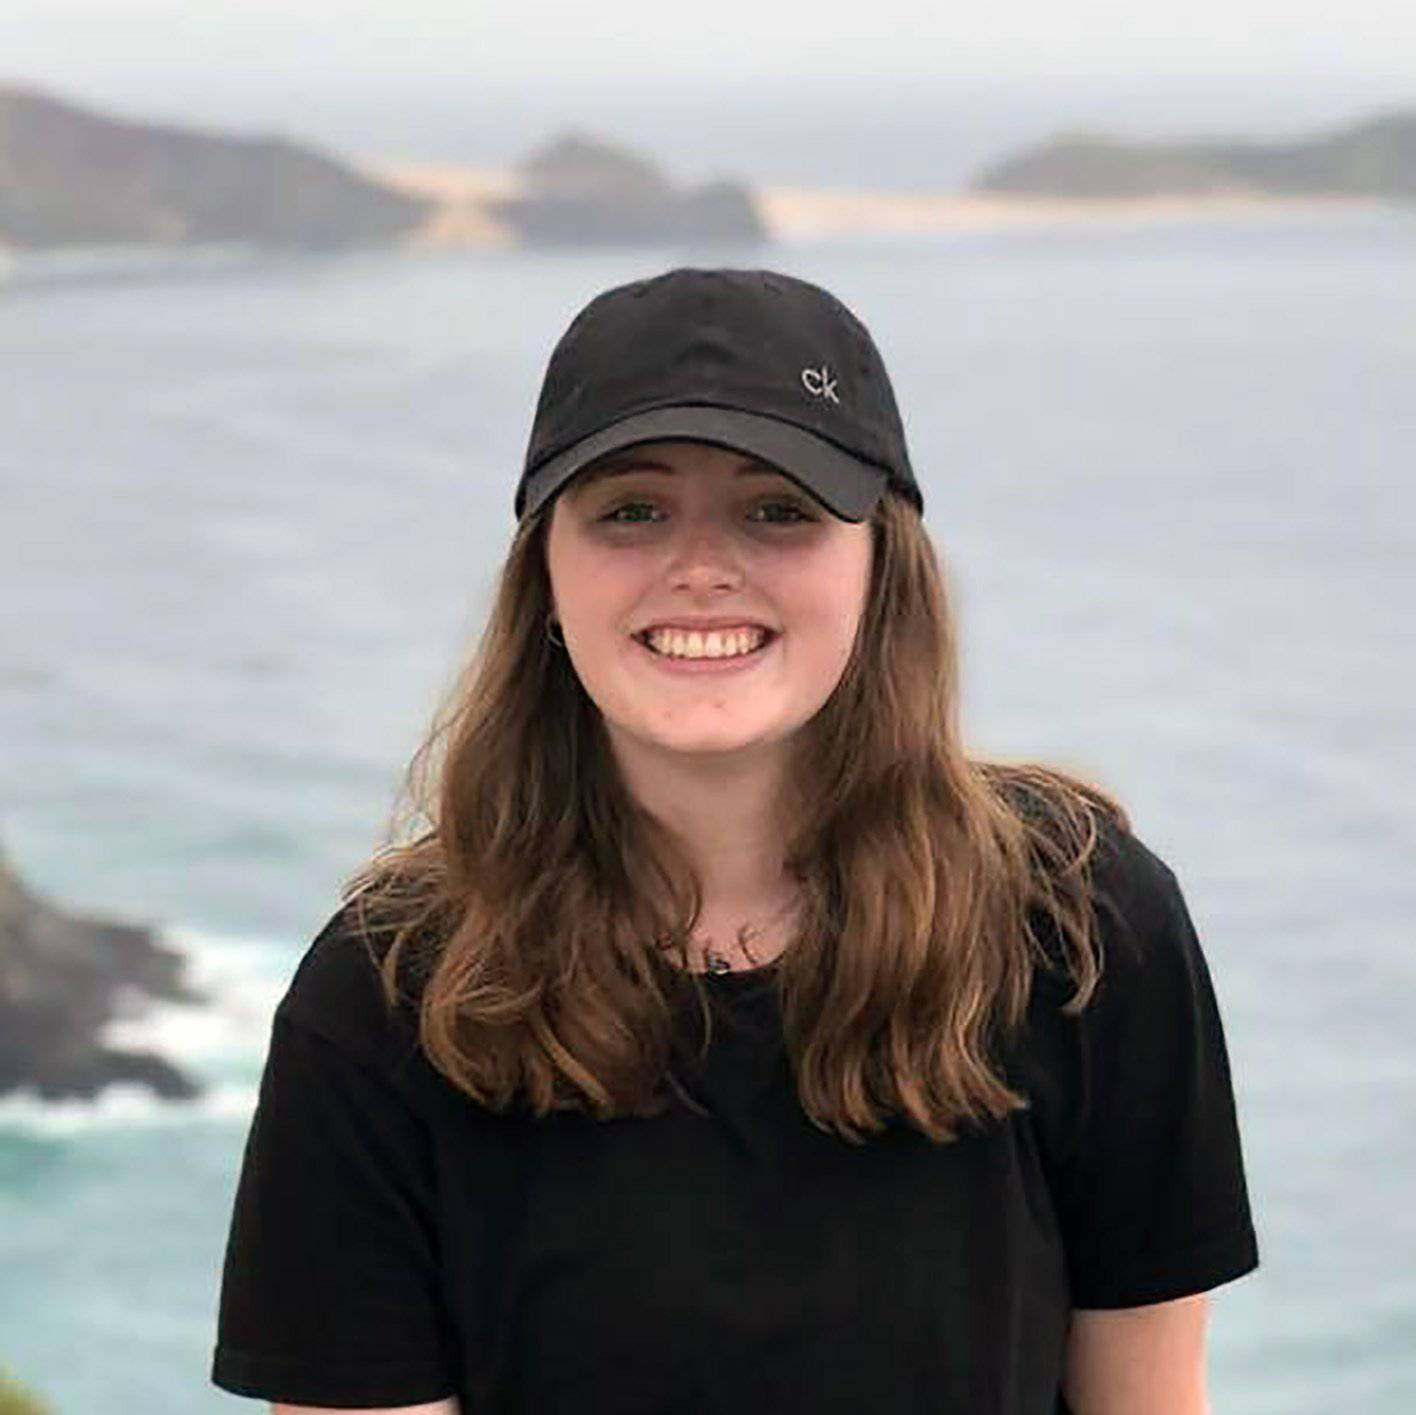 Grace Millane, British backpacker who has gone missing in New Zealand  - 08 Dec 2018